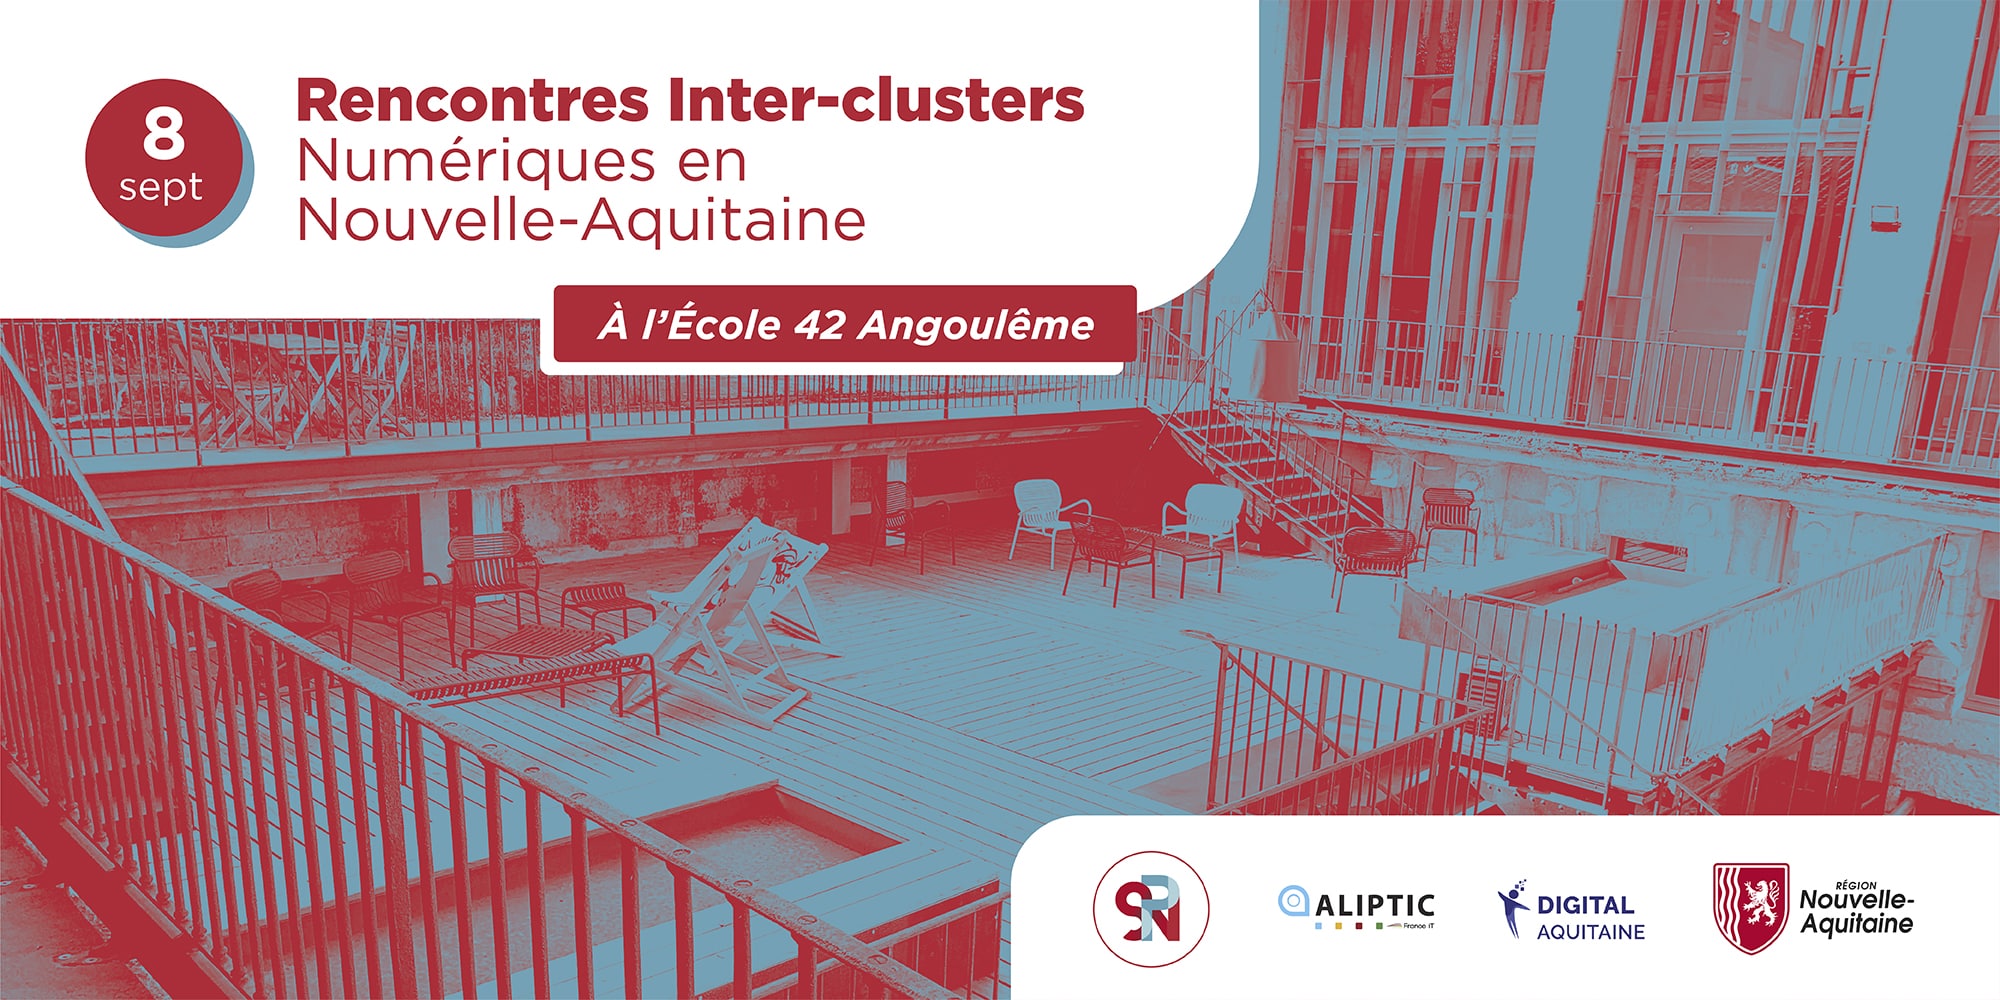 Rencontres Inter-clusters